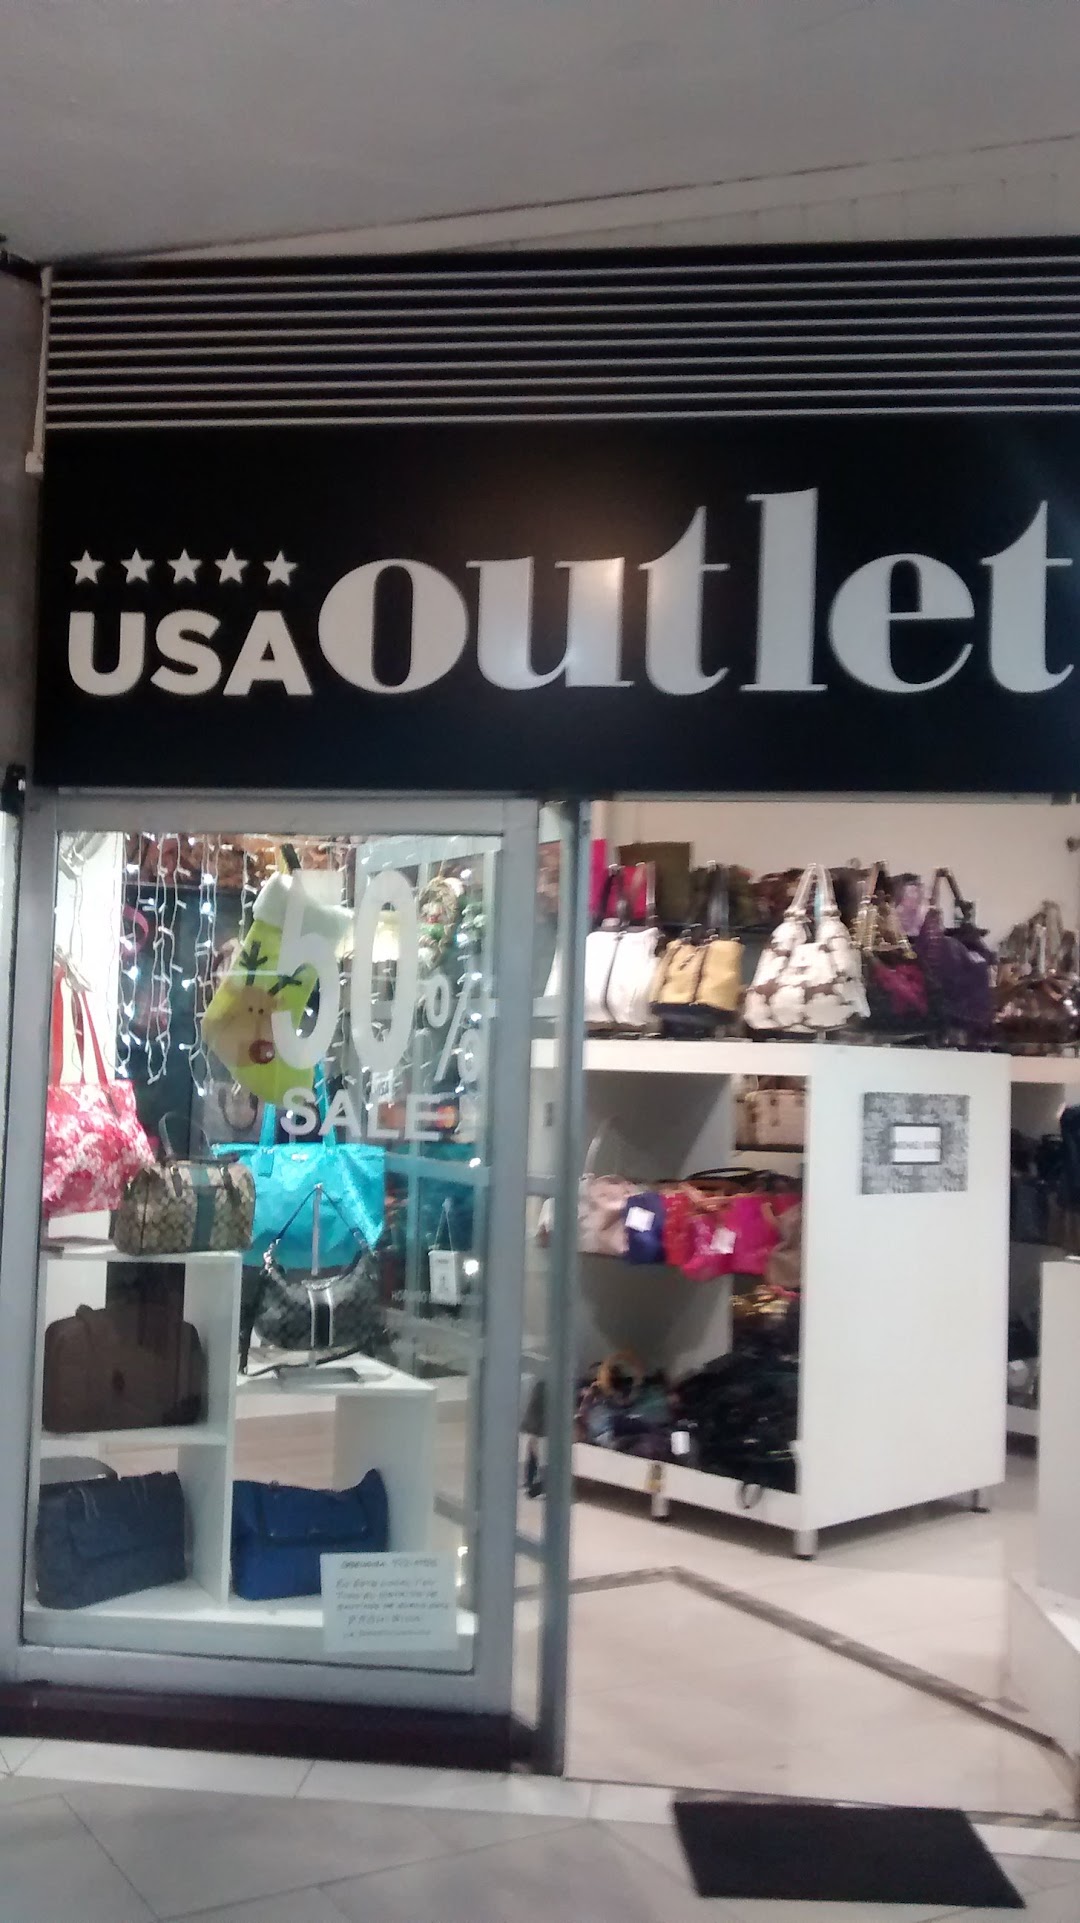 USA outlet